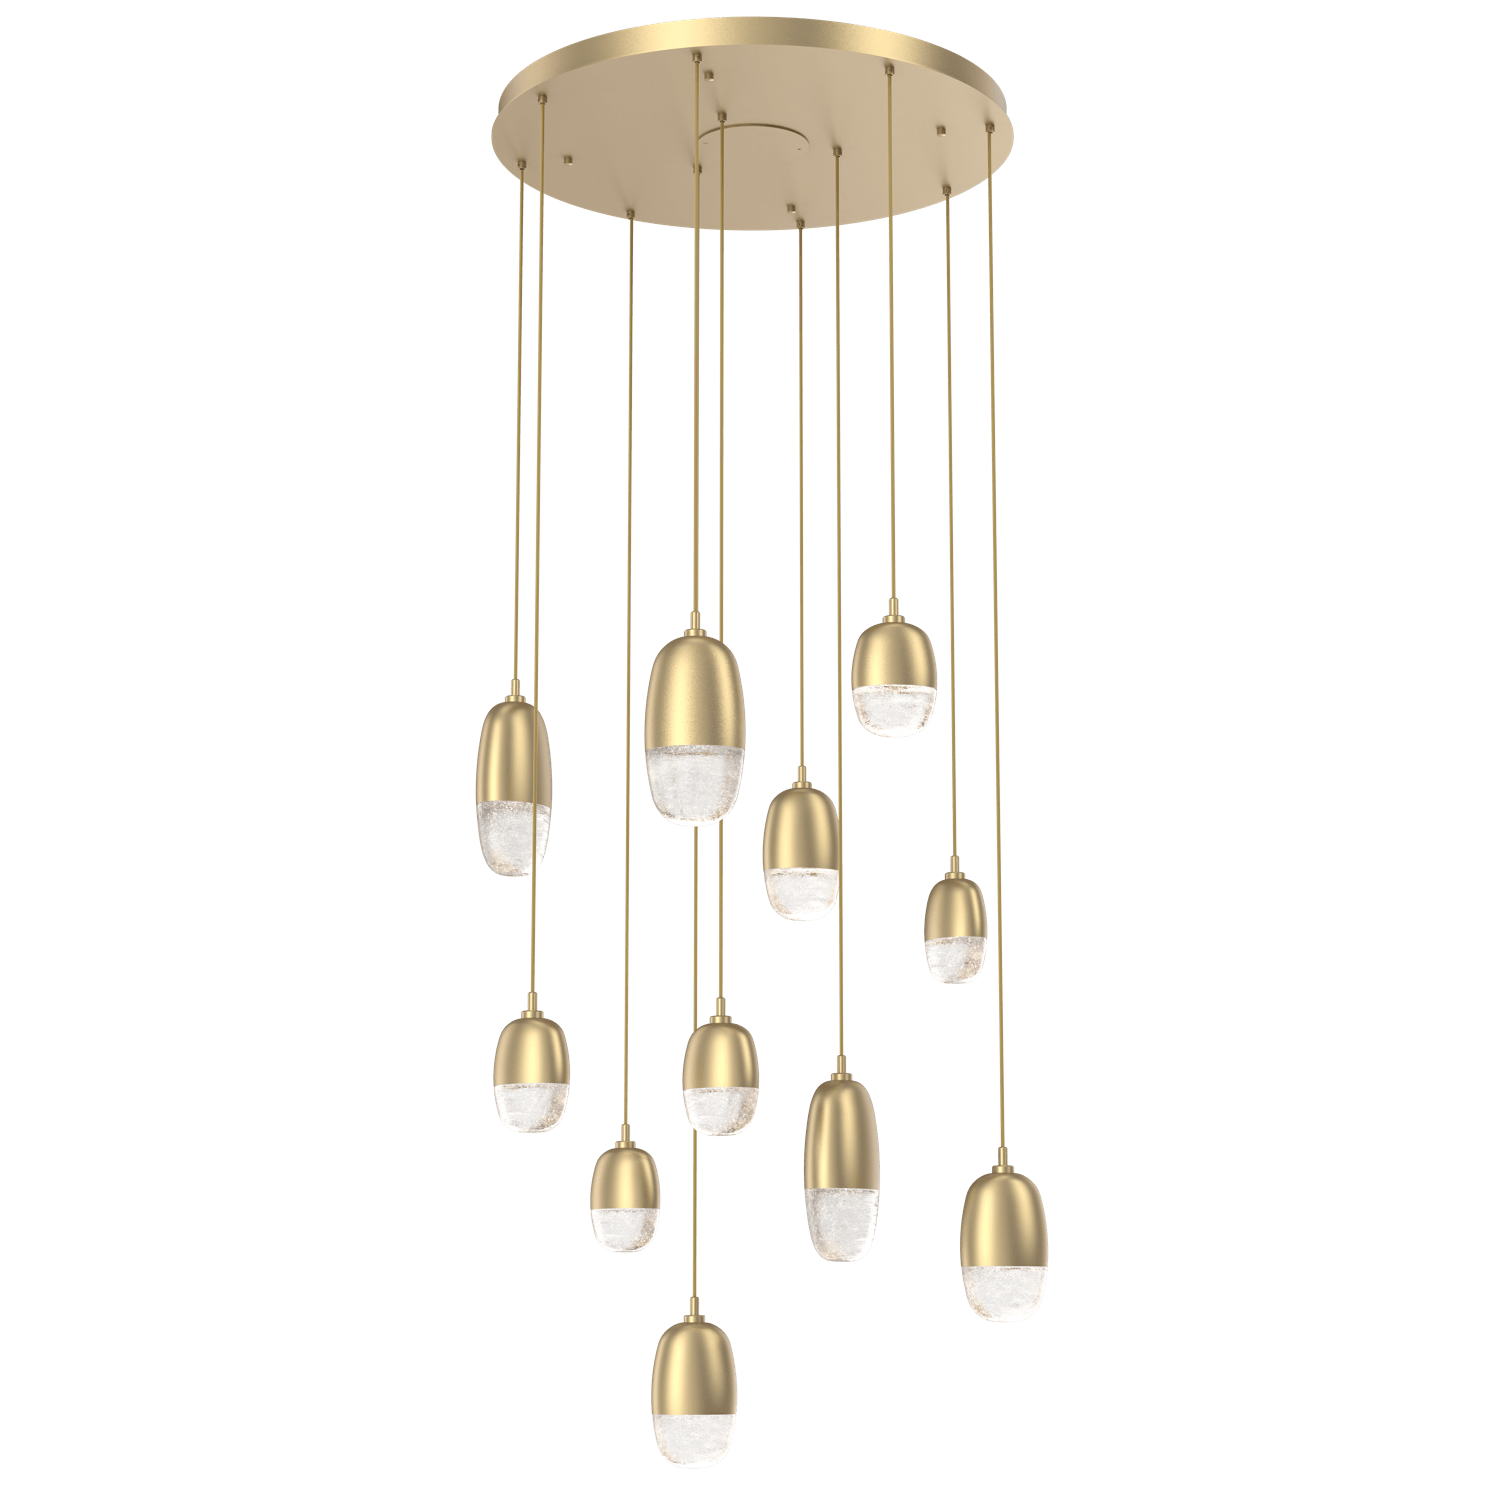 CHB0079-11-GB-Hammerton-Studio-Pebble-11-light-round-pendant-chandelier-with-gilded-brass-finish-and-clear-cast-glass-shades-and-LED-lamping